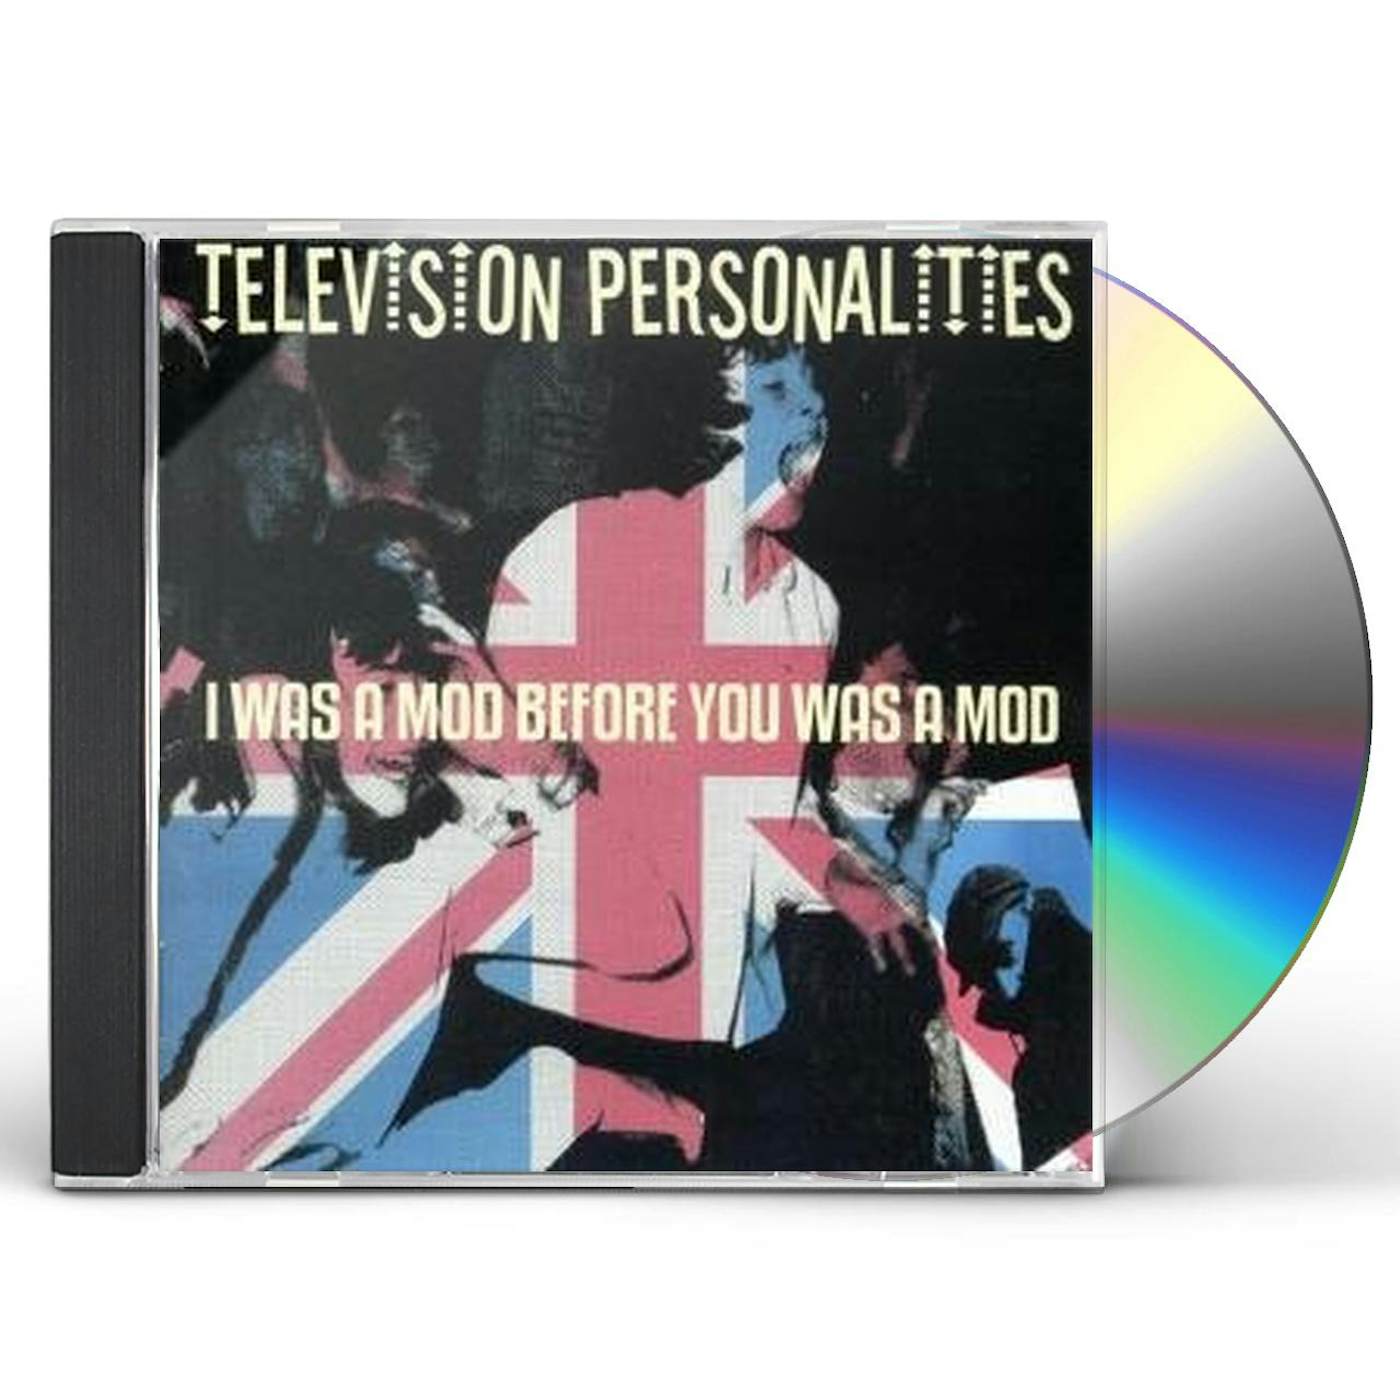 Television Personalities I WAS A MOD BEFORE YOU WAS A MOD CD